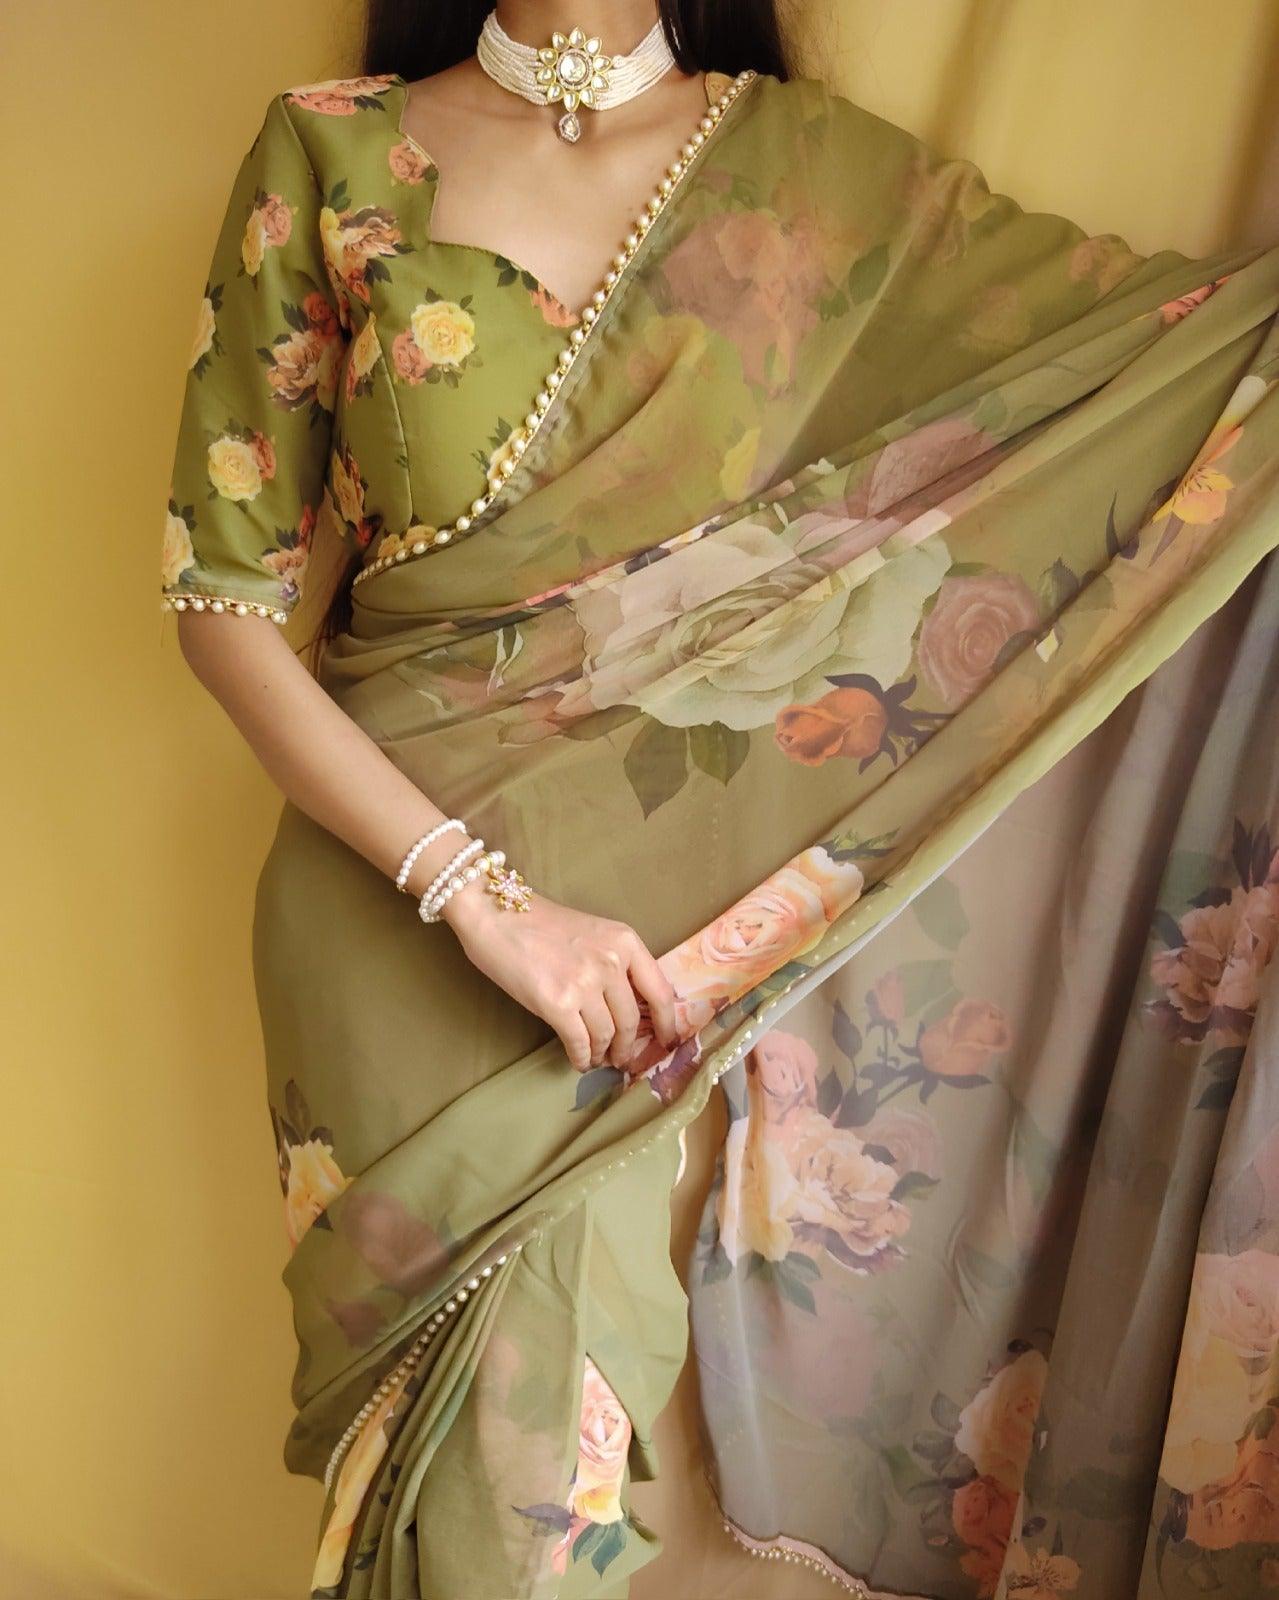 Olive Green Floral Summer Classy Georgette Printed Saree with Pearl Lace Border - Inayakhan Shop 